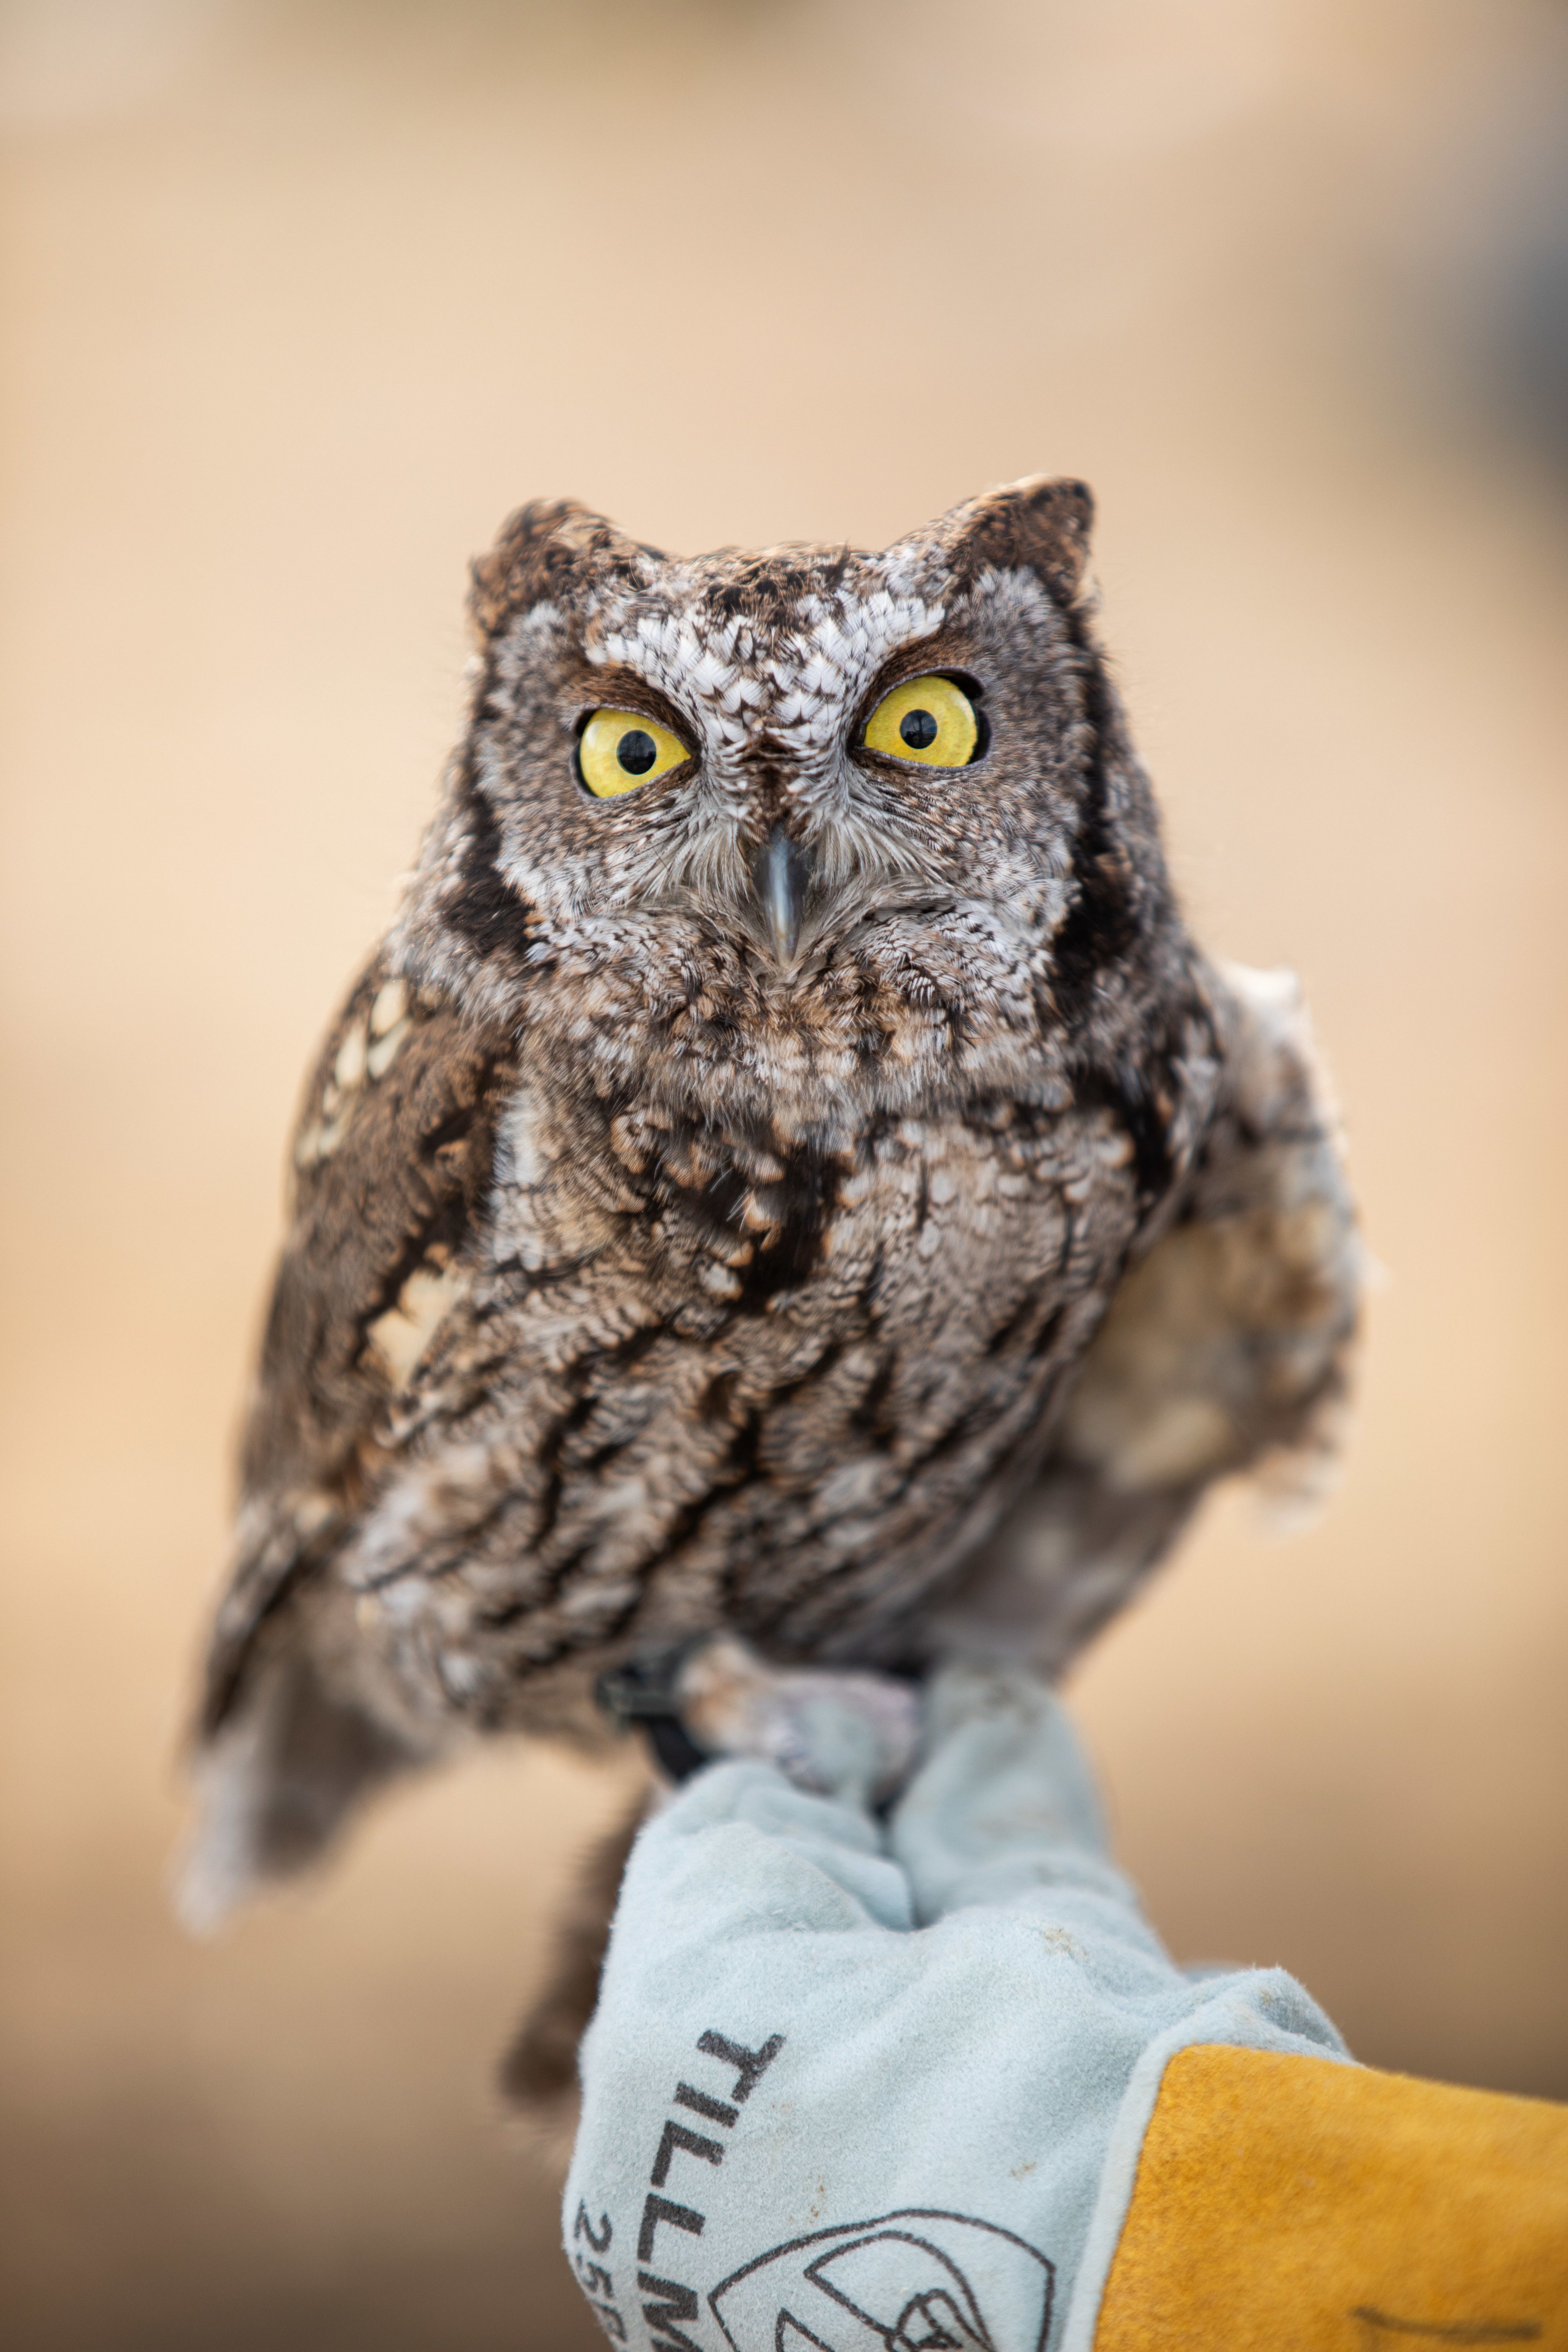 Owls of Montana: Join Montana Fish, Wildlife & Parks for a presentation that is all about owls. We will learn about this amazing group of raptors and even meet some live birds!